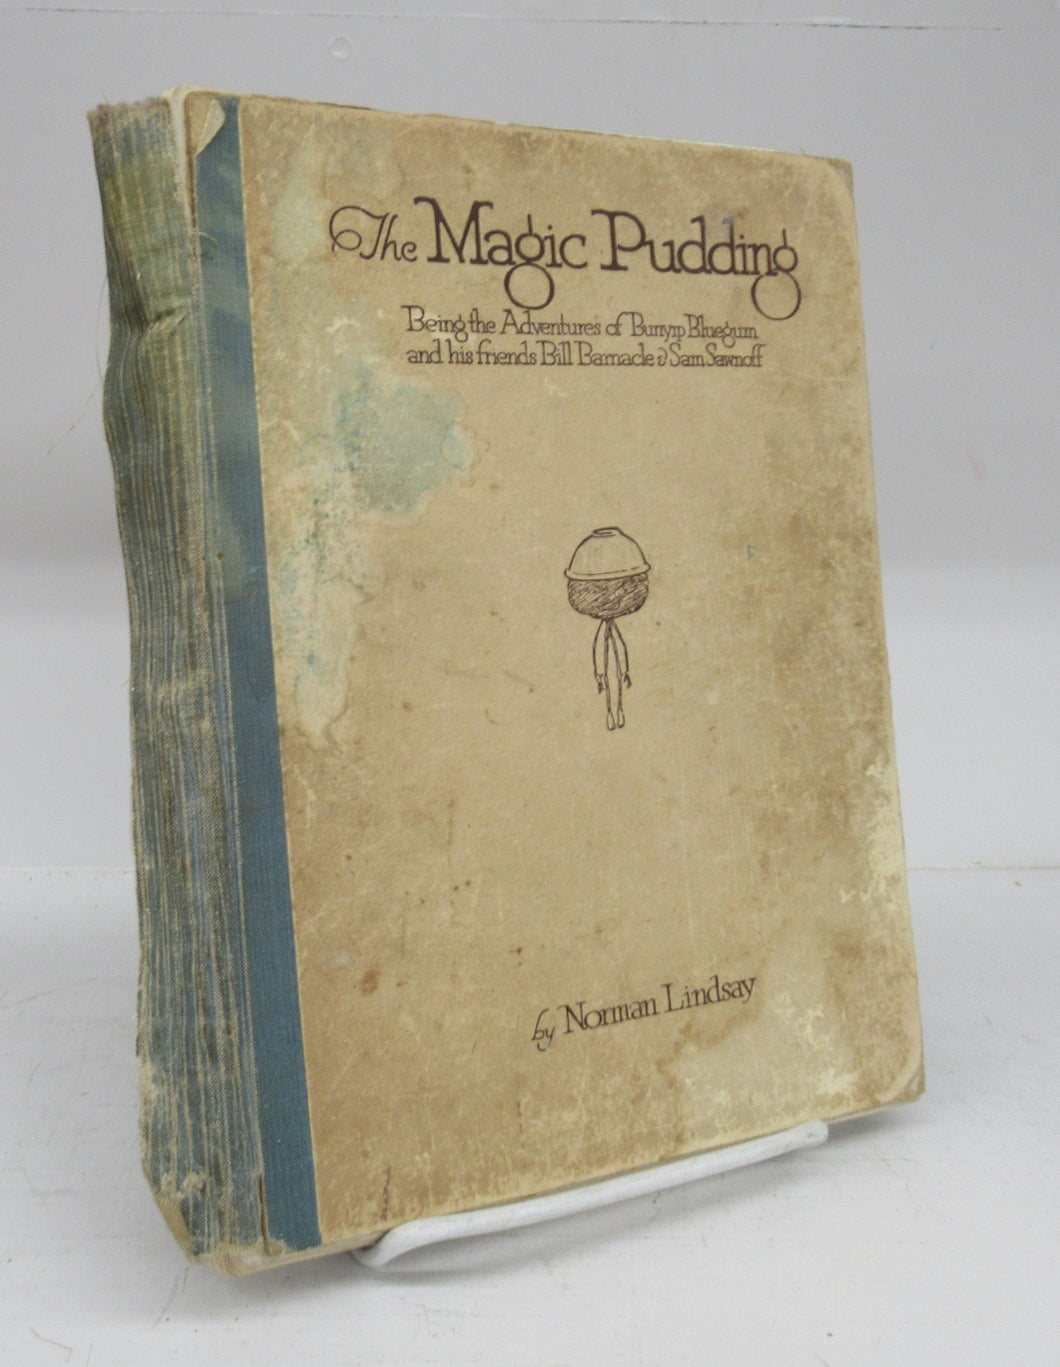 The Magic Pudding: Being the Adventures of Bunyip Bluegum and his friends Bill Barnacle & Sam Sawnoff